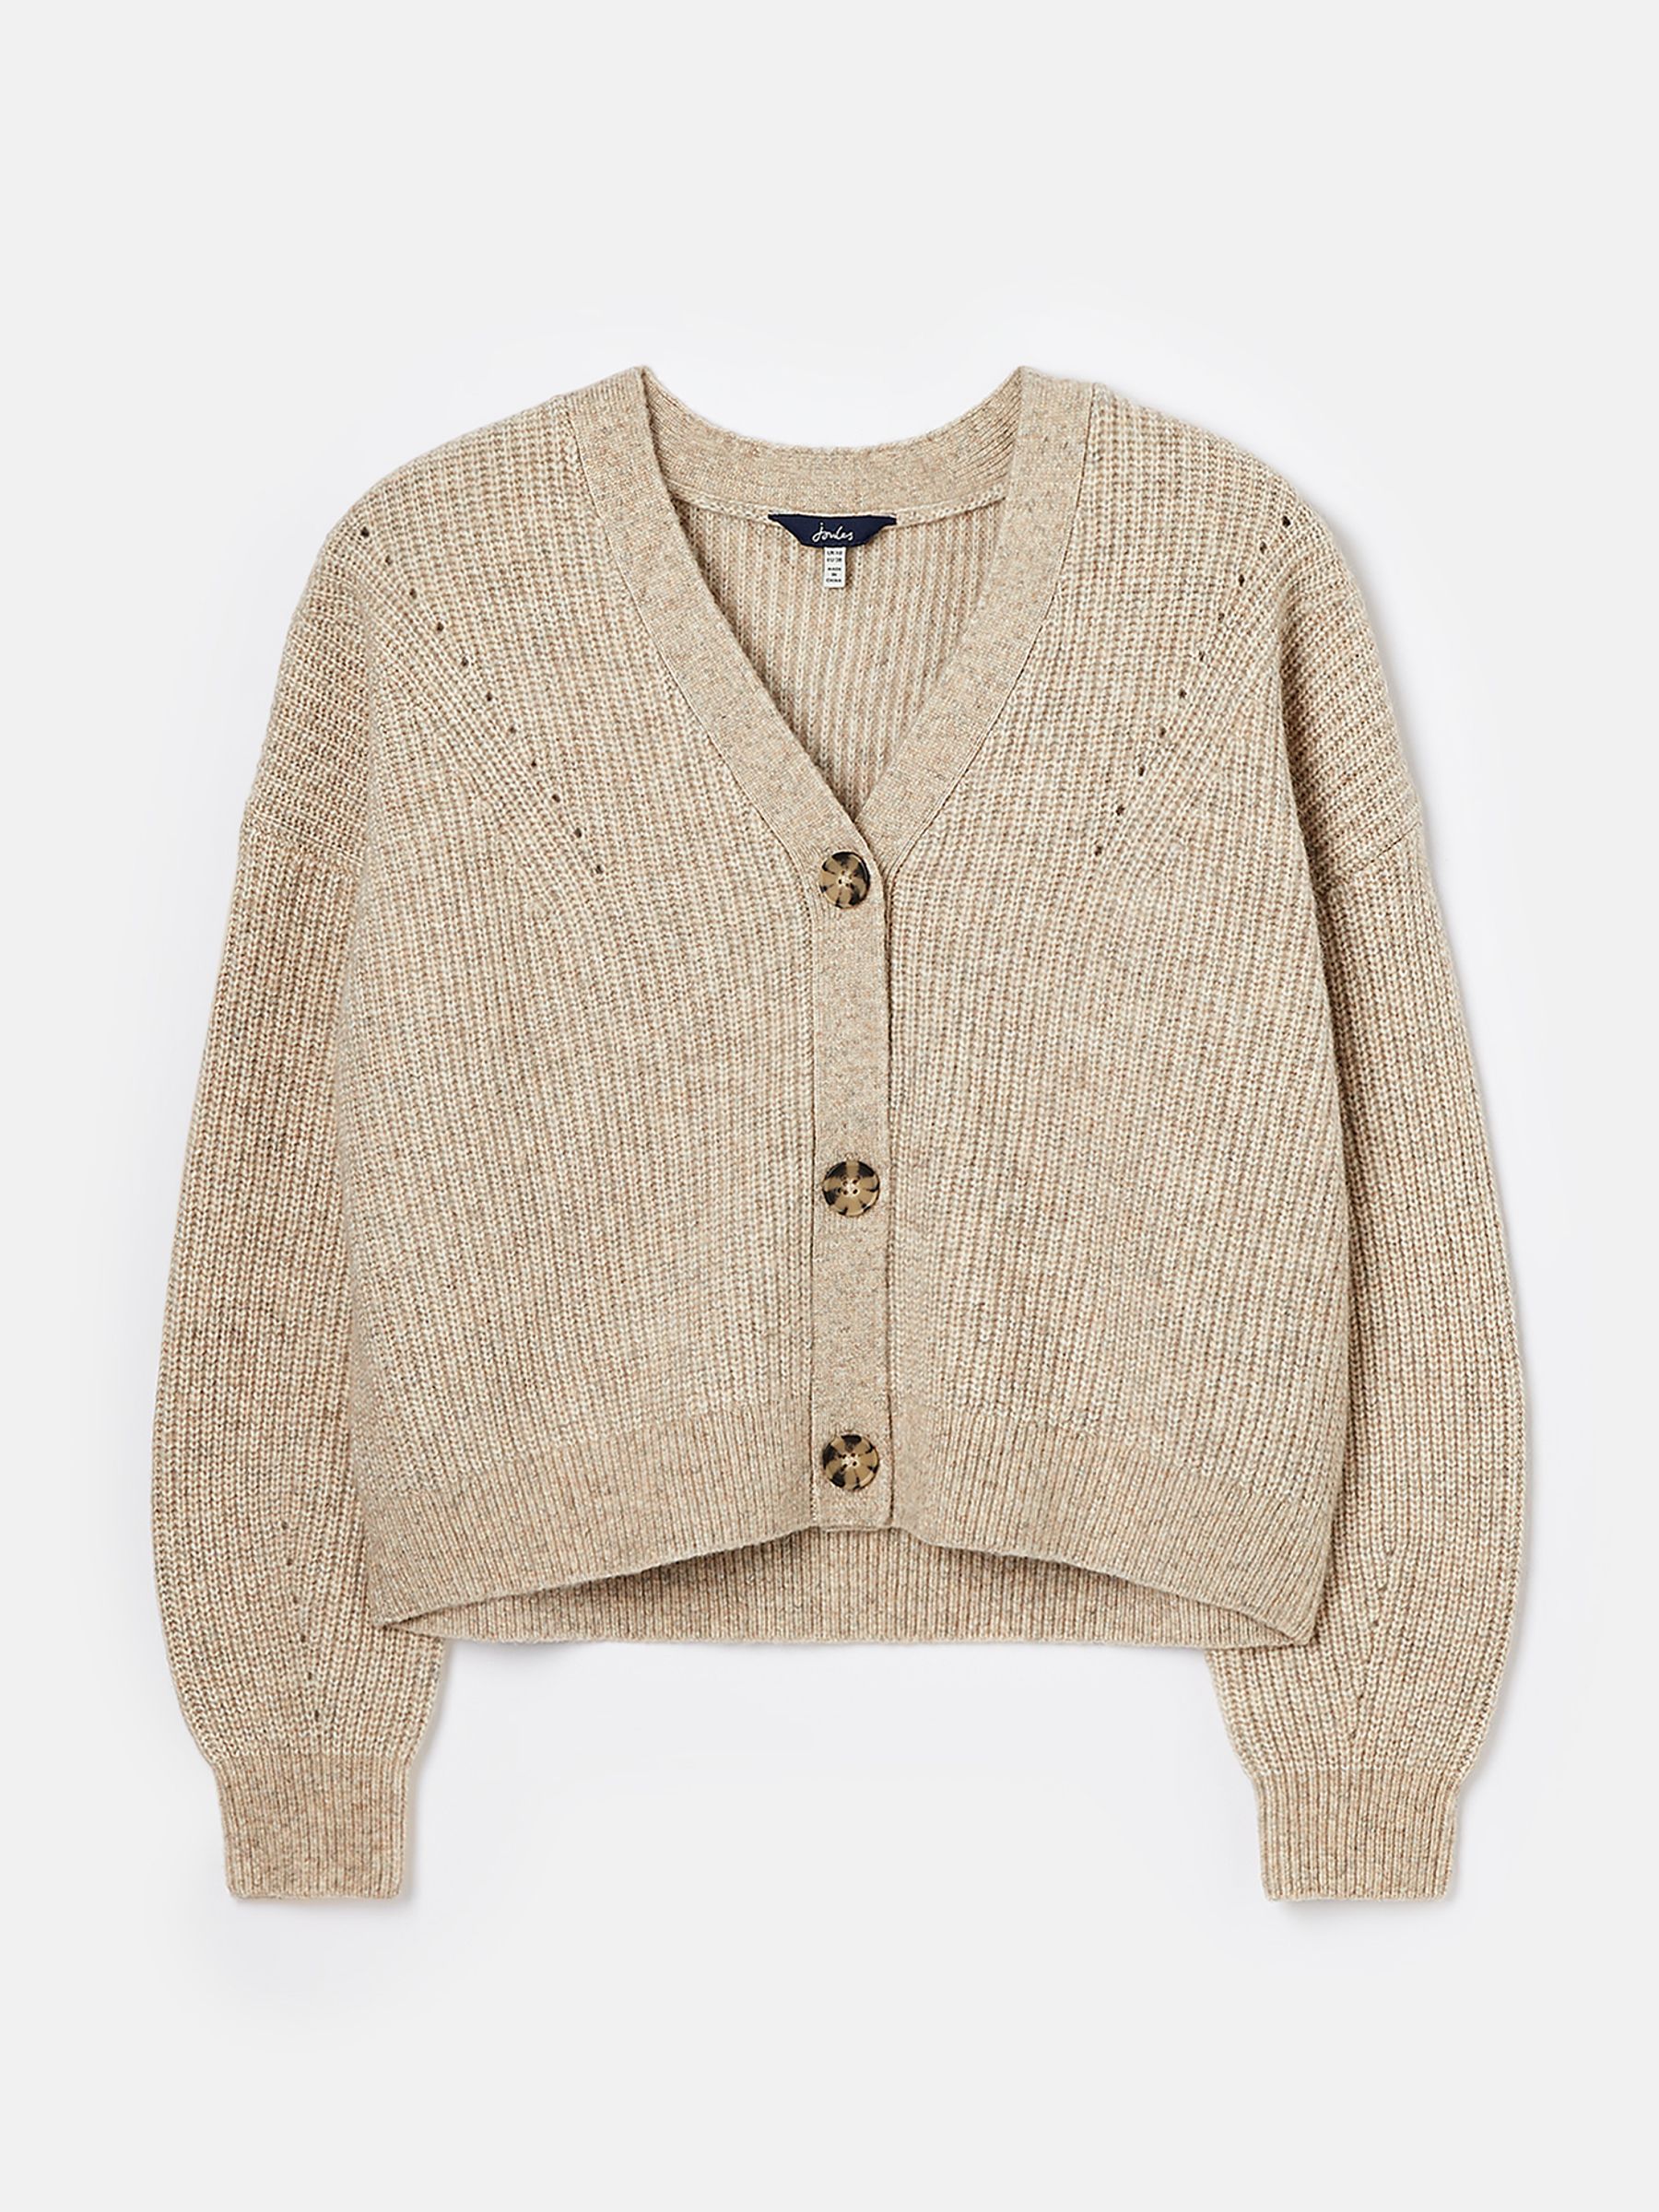 Buy Joules Samantha V Neck Ribbed Knit Buttoned Cardigan from the ...